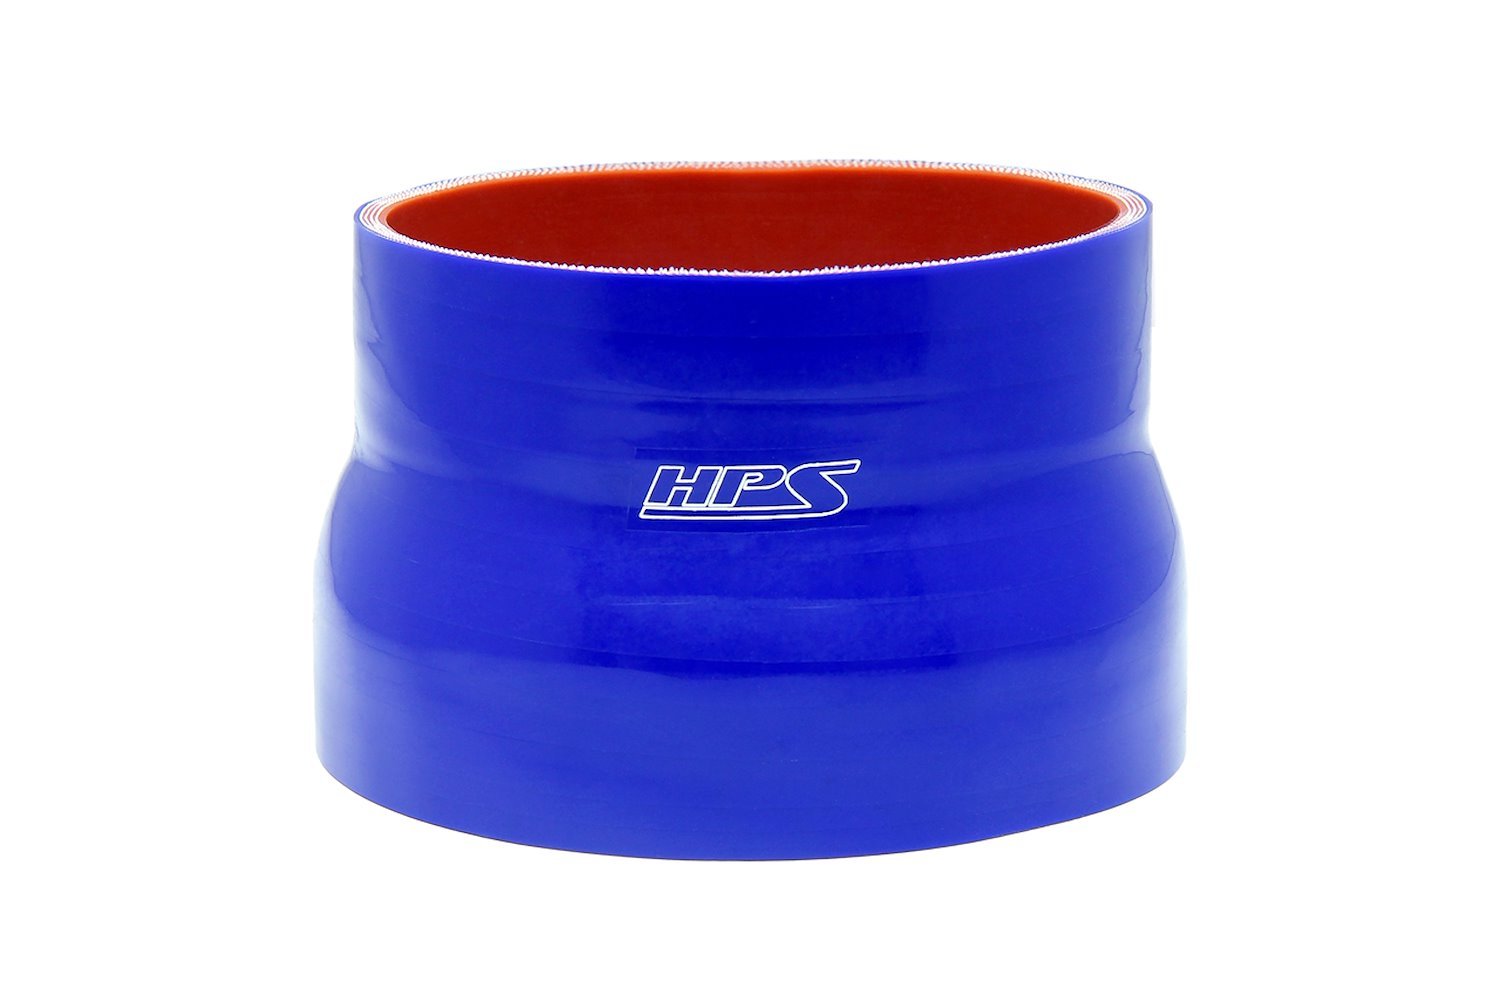 HTSR-350-450-L6-BLUE Silicone Reducer Hose, High-Temp 4-Ply Reinforced, 3-1/2 in. - 4-1/2 in. ID, 6 in. Long, Blue